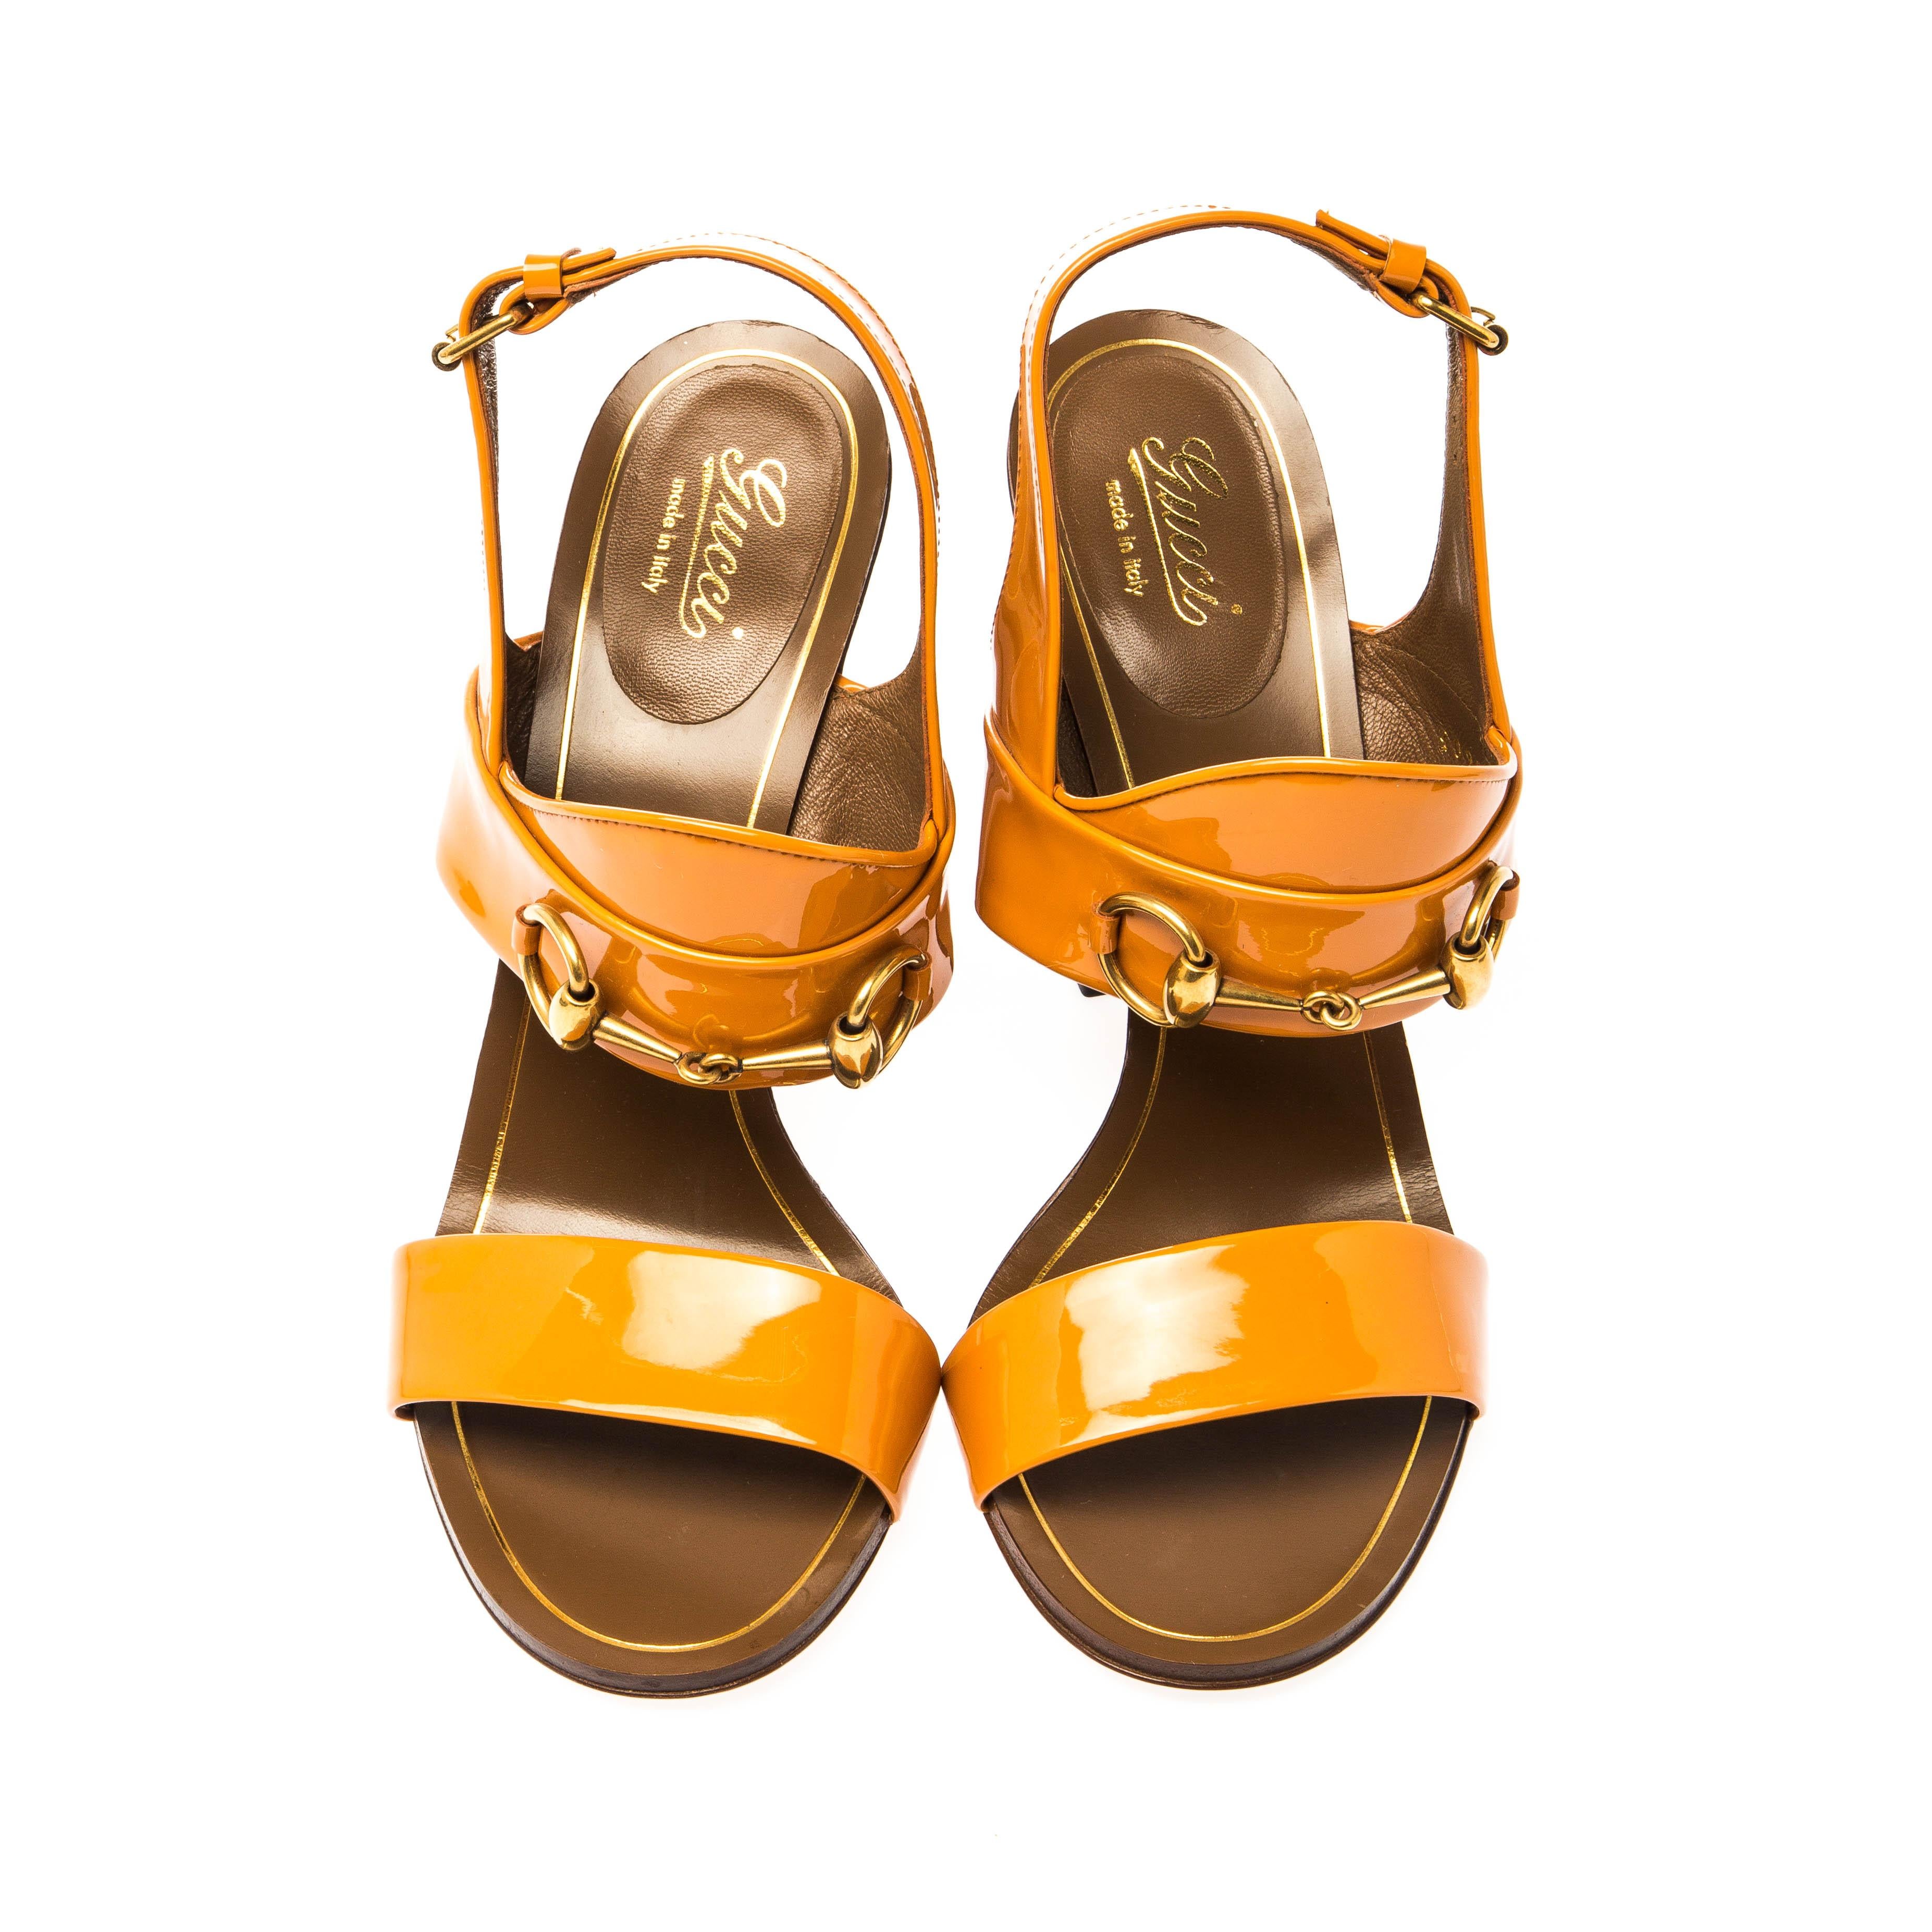 These charming and sophisticated Gucci leather sandals are perfect for dressy days as well as nights. Featuring gold-tone horsebit details on the ankle strap, they exude a feminine appeal. They are equipped with adjustable buckles to ensure comfort